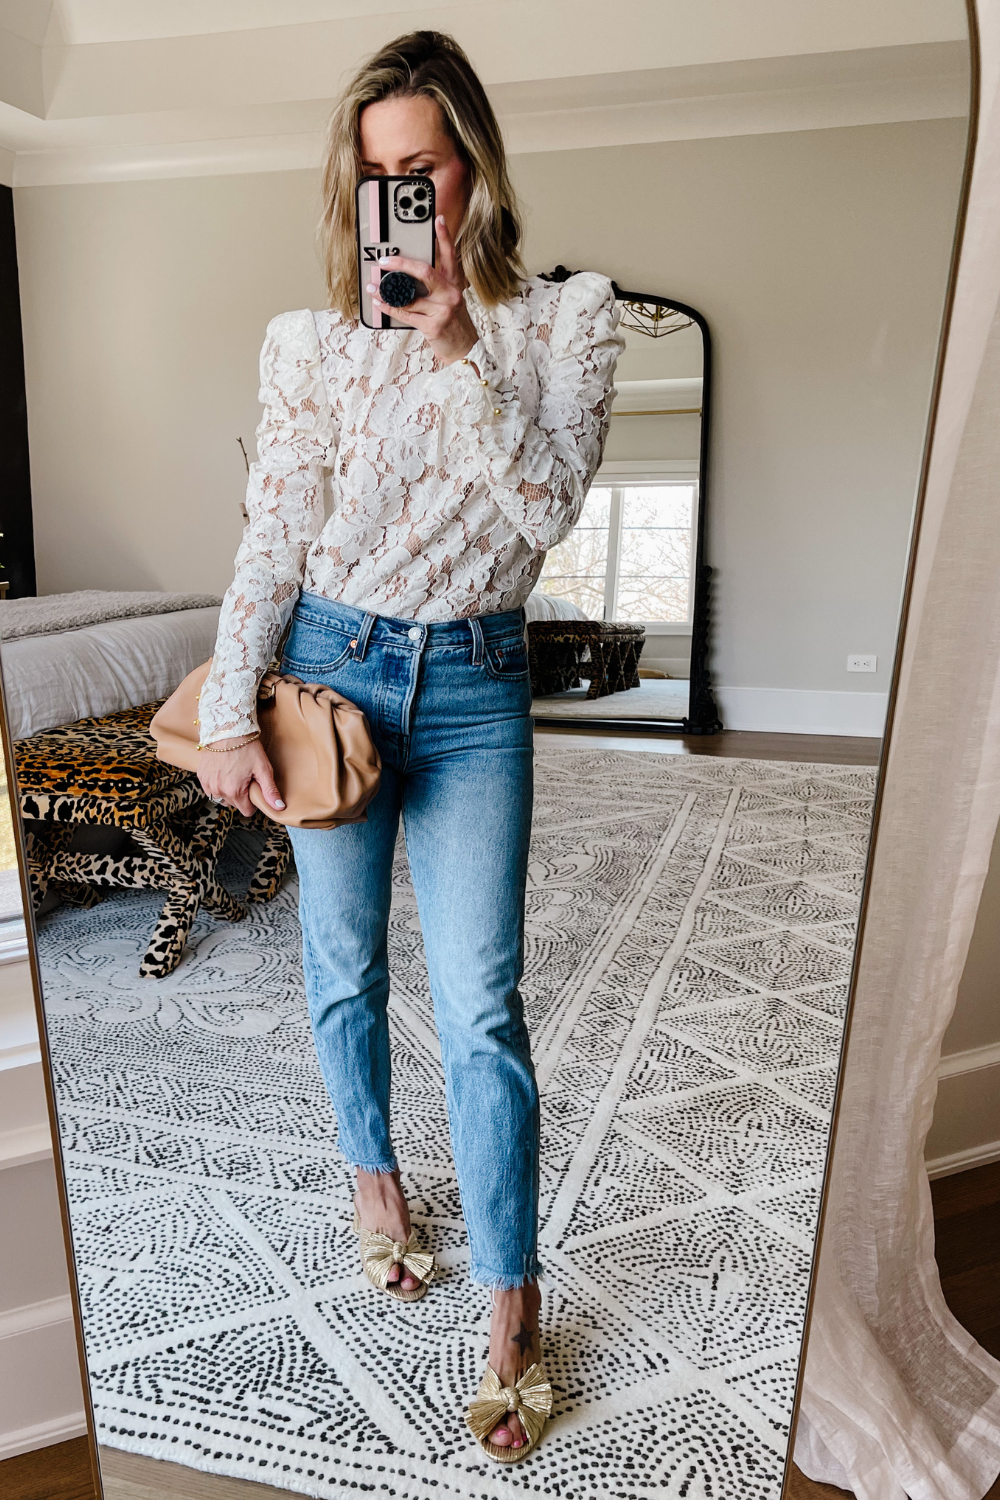 Suzanne wearing a white lace blouse, Levi's wedgie jeans, metallic bow heels, and carrying a clutch 